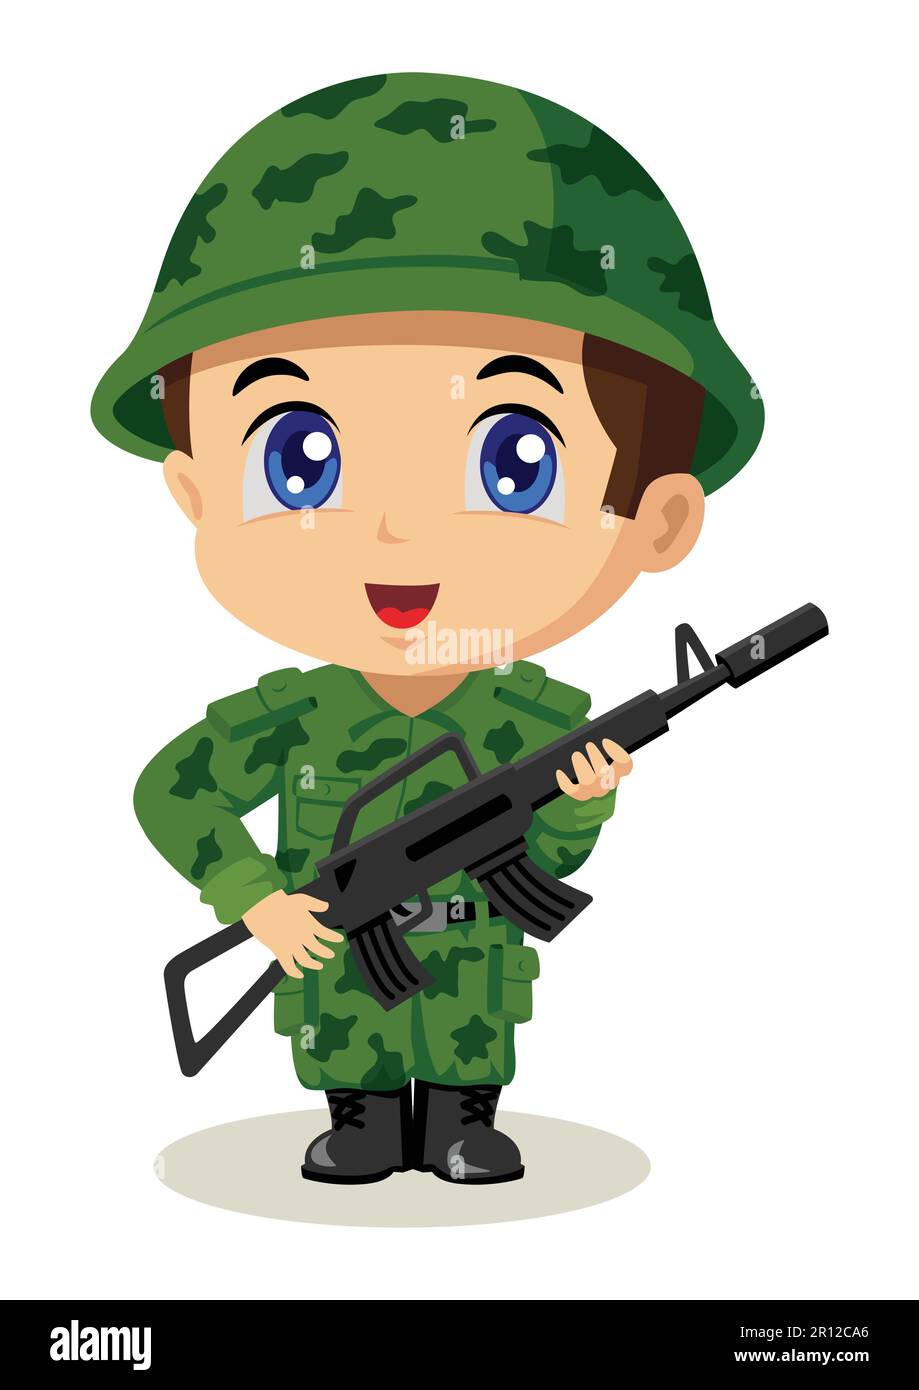 Cute cartoon illustration of a soldier Stock Vector